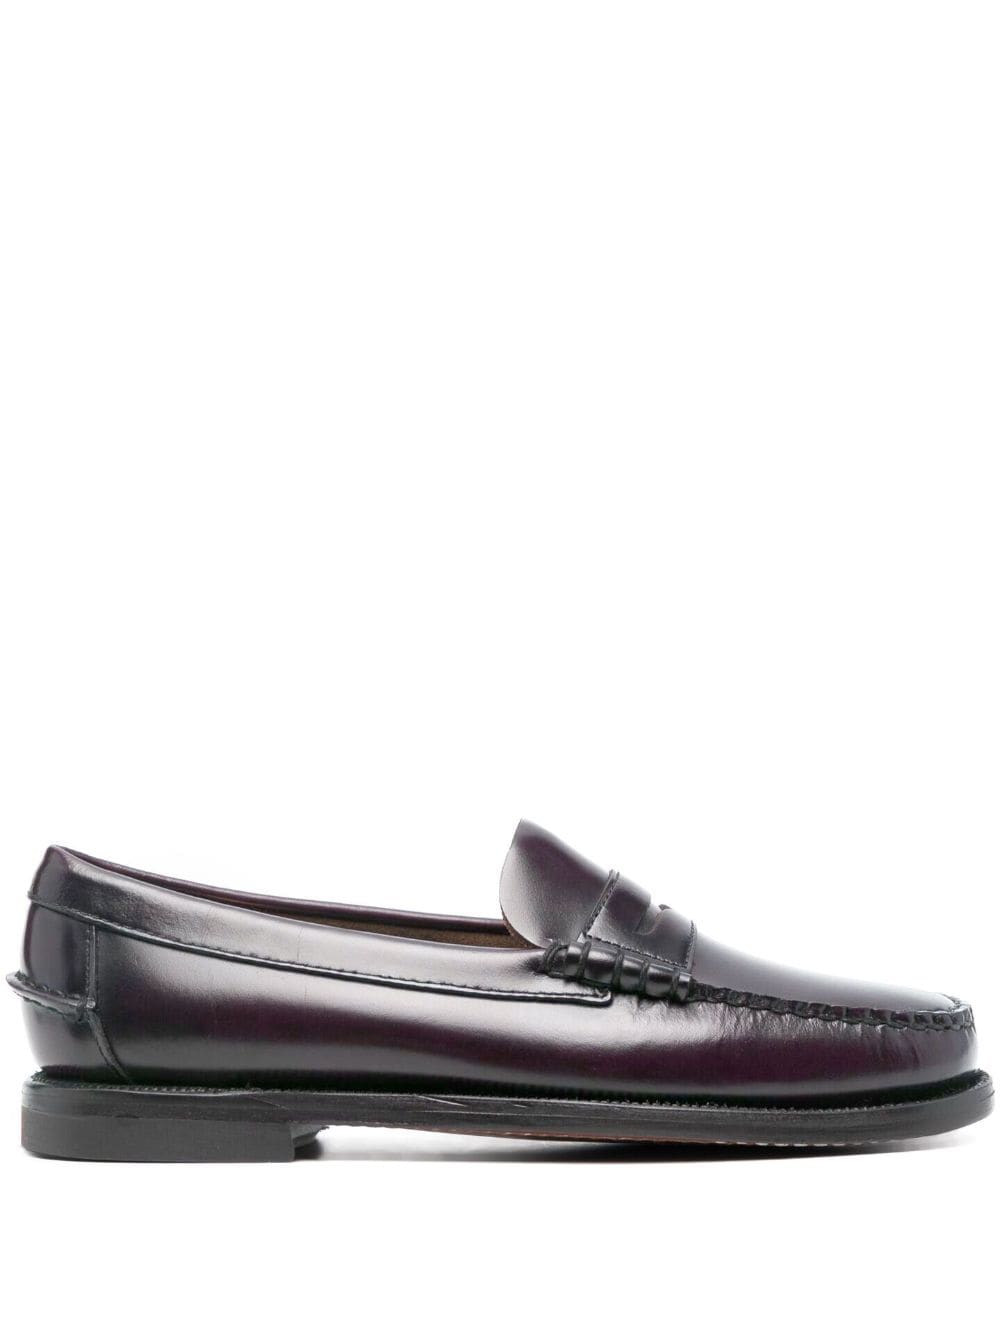 Classic Dan leather loafers